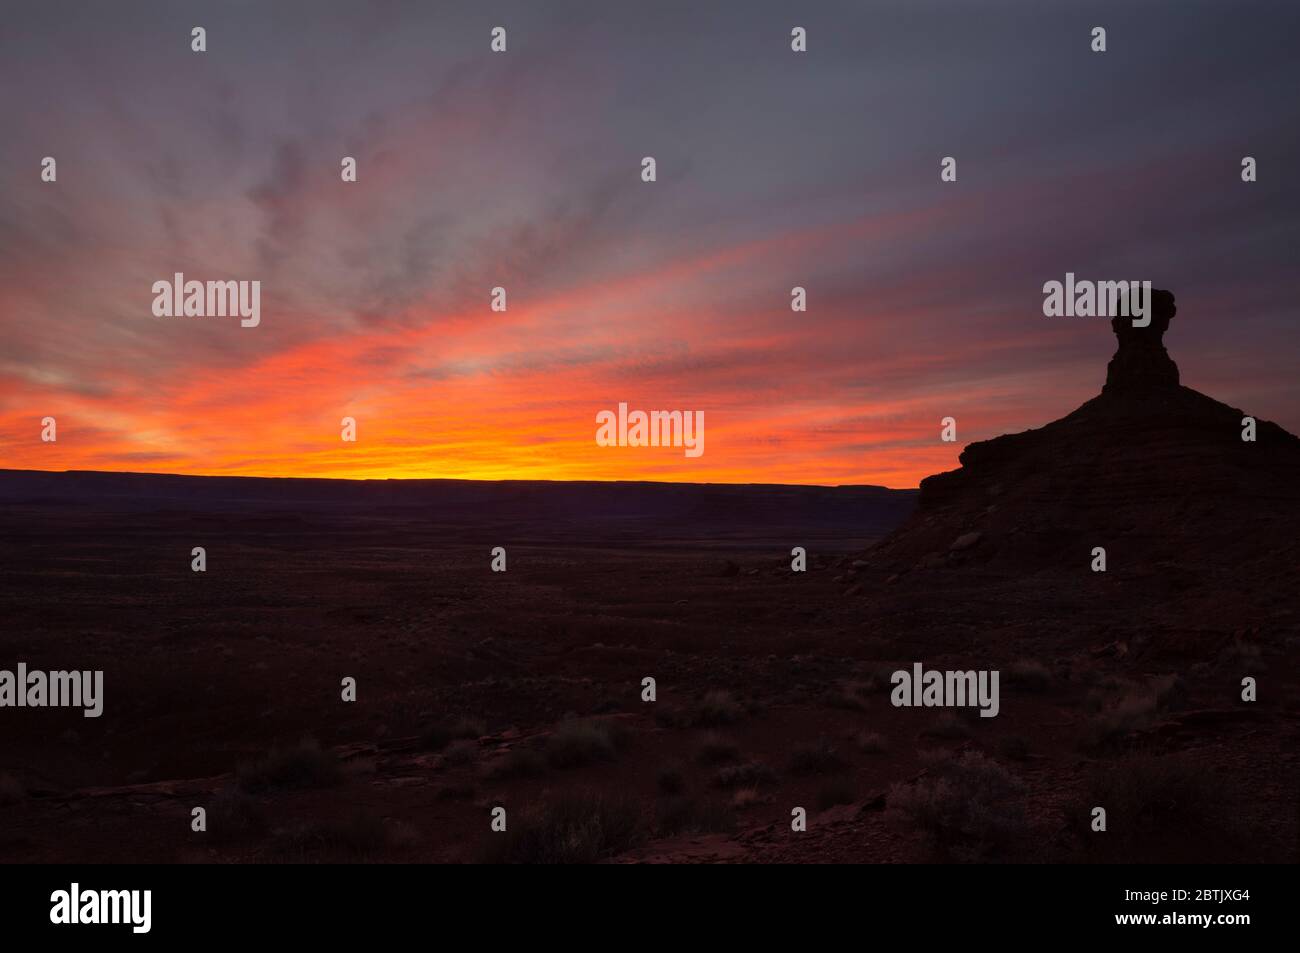 UT00677-00...UTAH - Towering butte at sunset in the Valley of the Gods, an area of critical environmental concern. Stock Photo